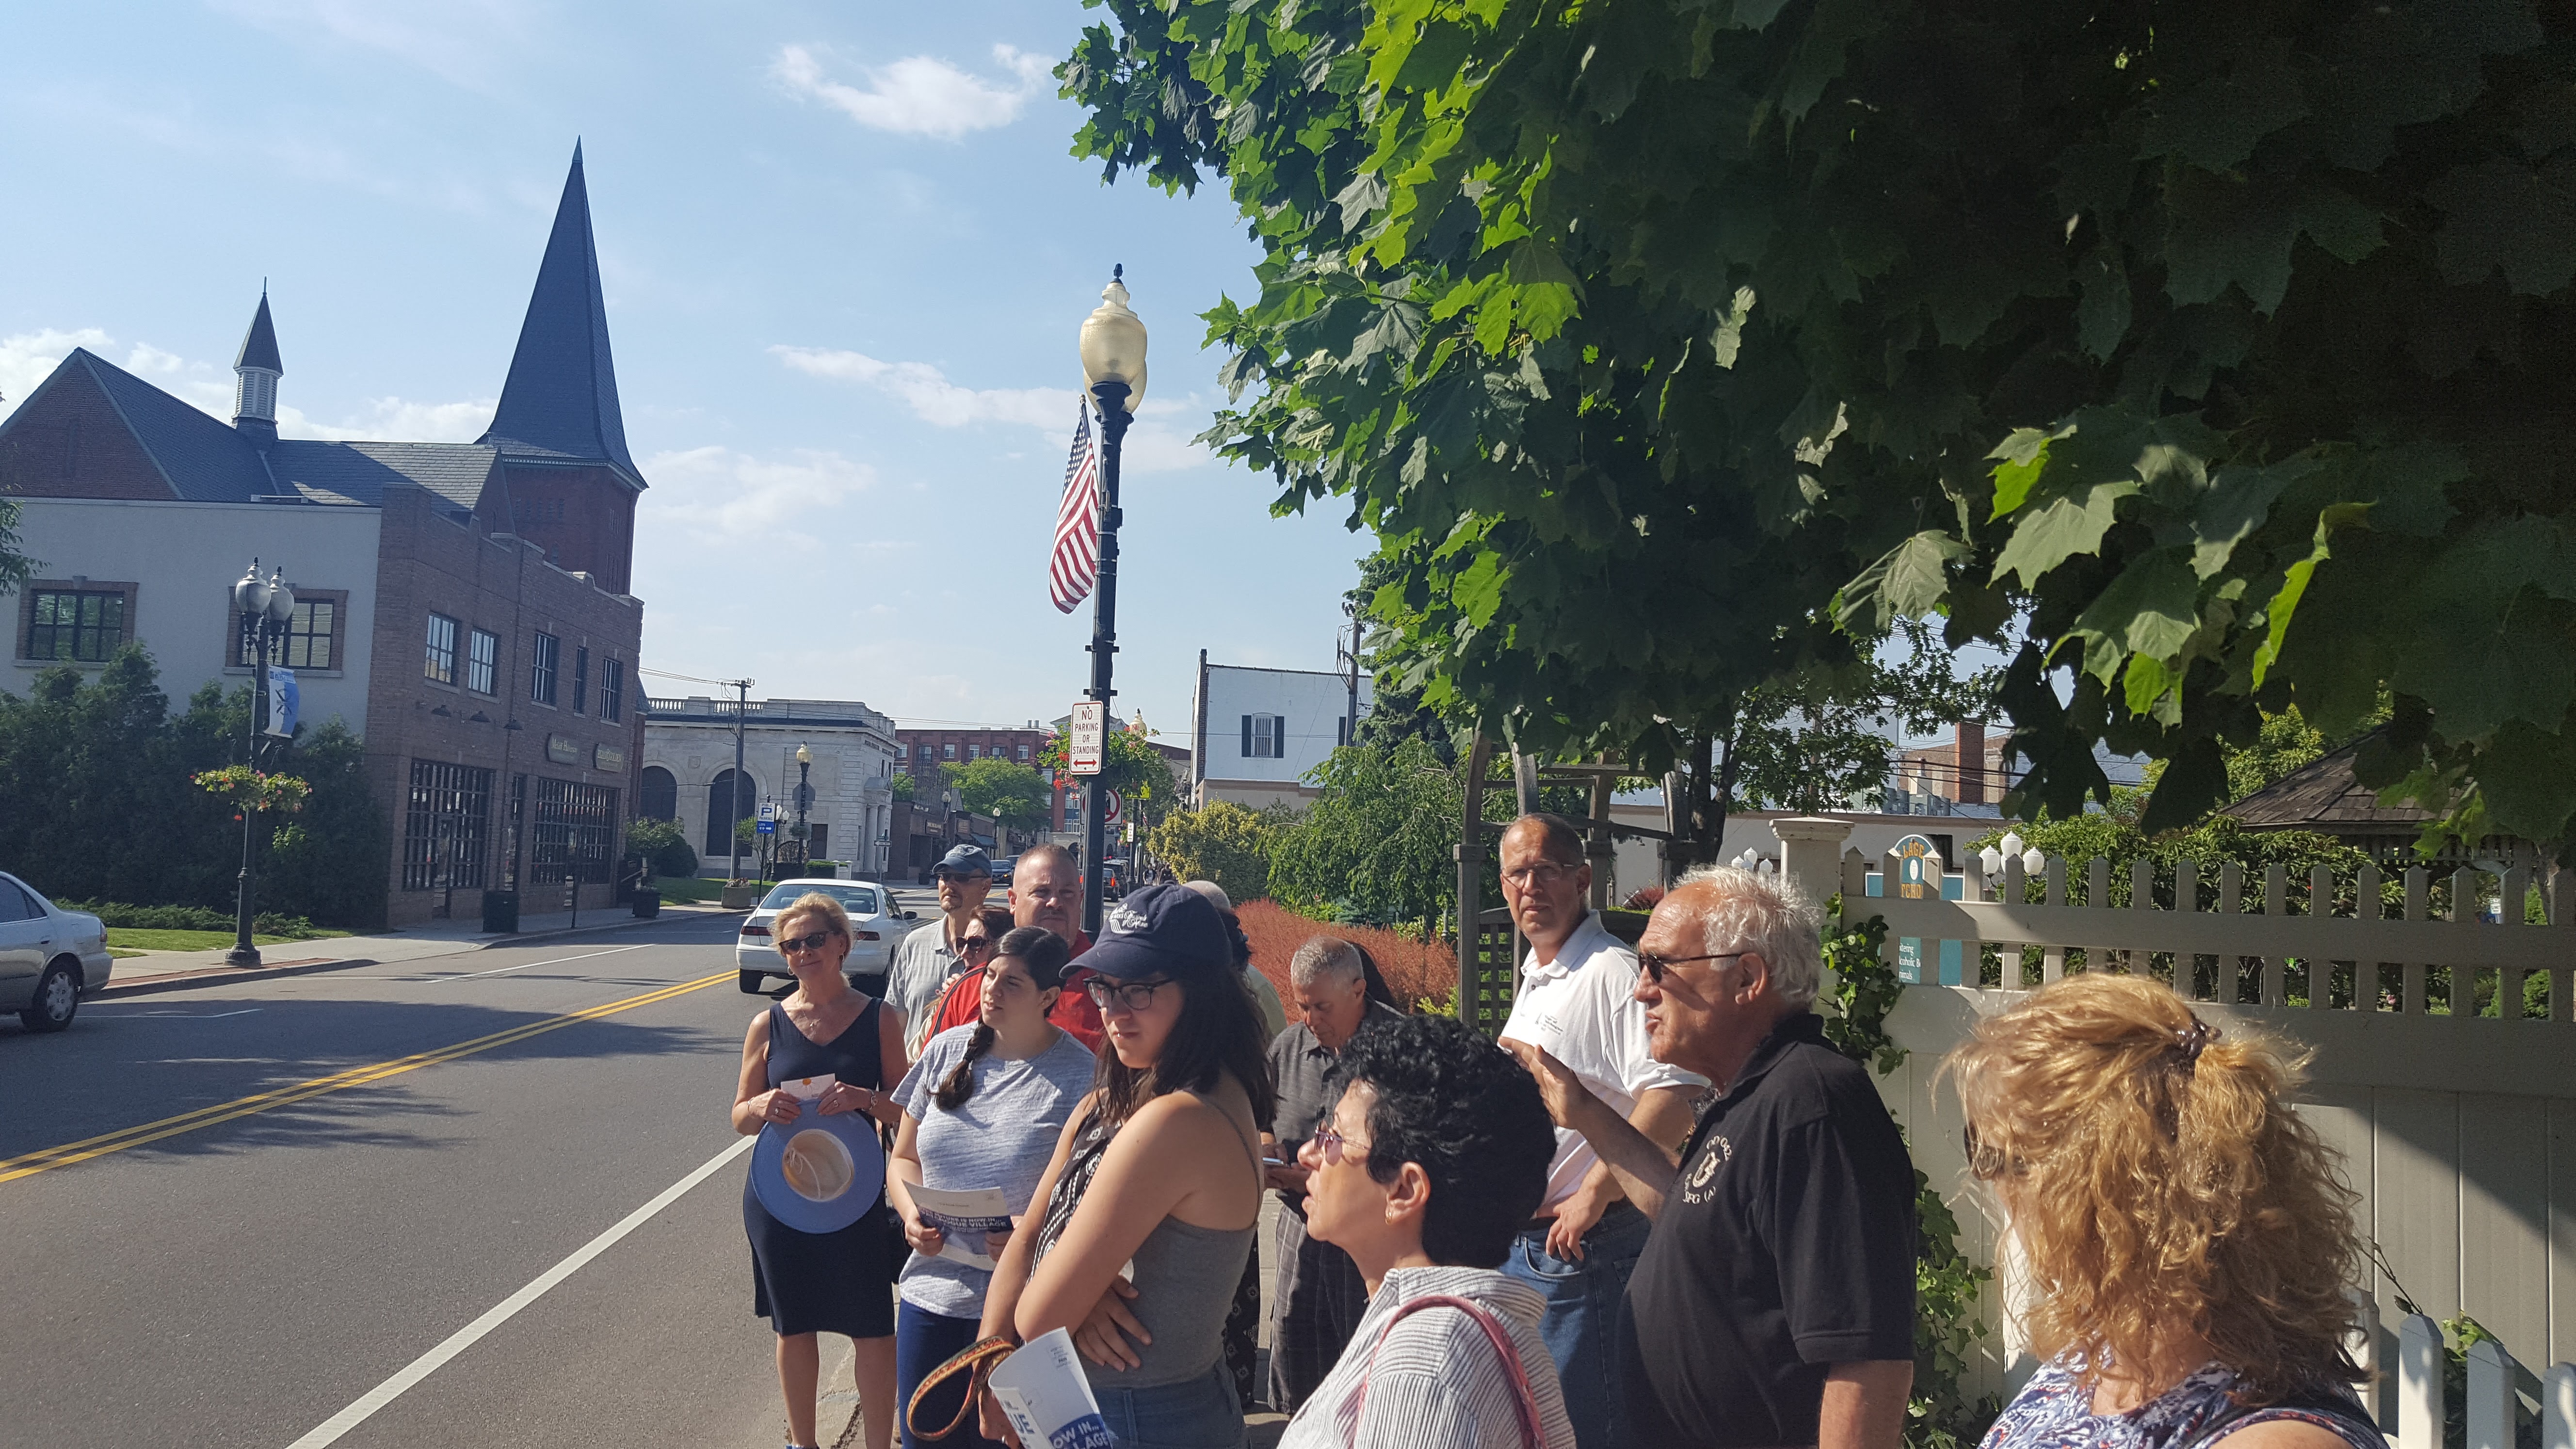 The 'Downtown Patchogue Walking Tour' took place on Saturday, June 10th 2017